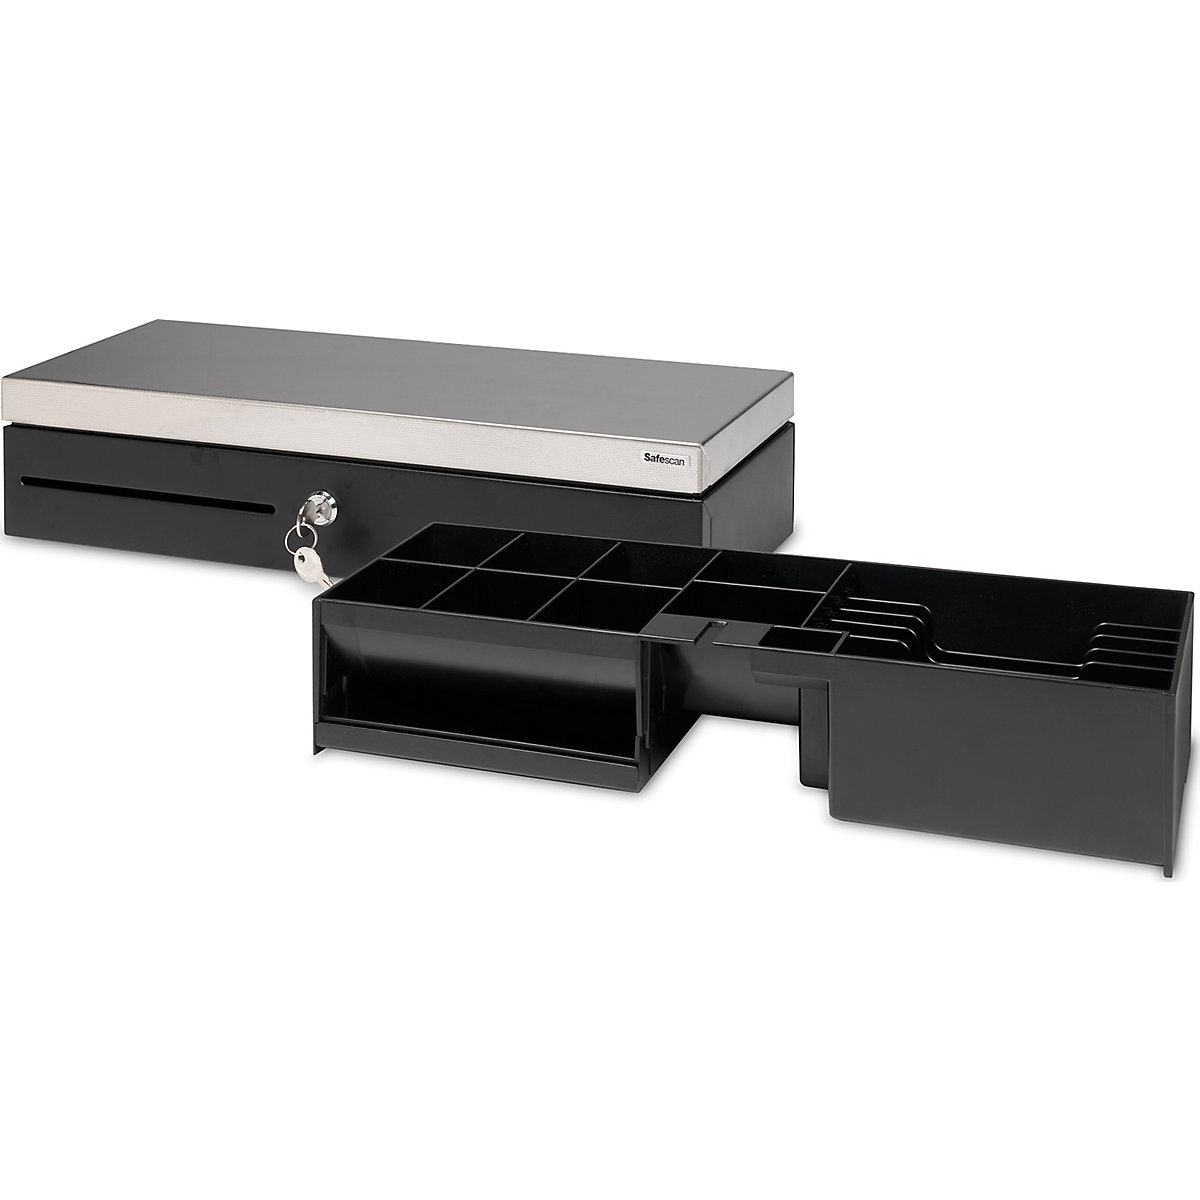 Cash drawer with hinged lid – Safescan